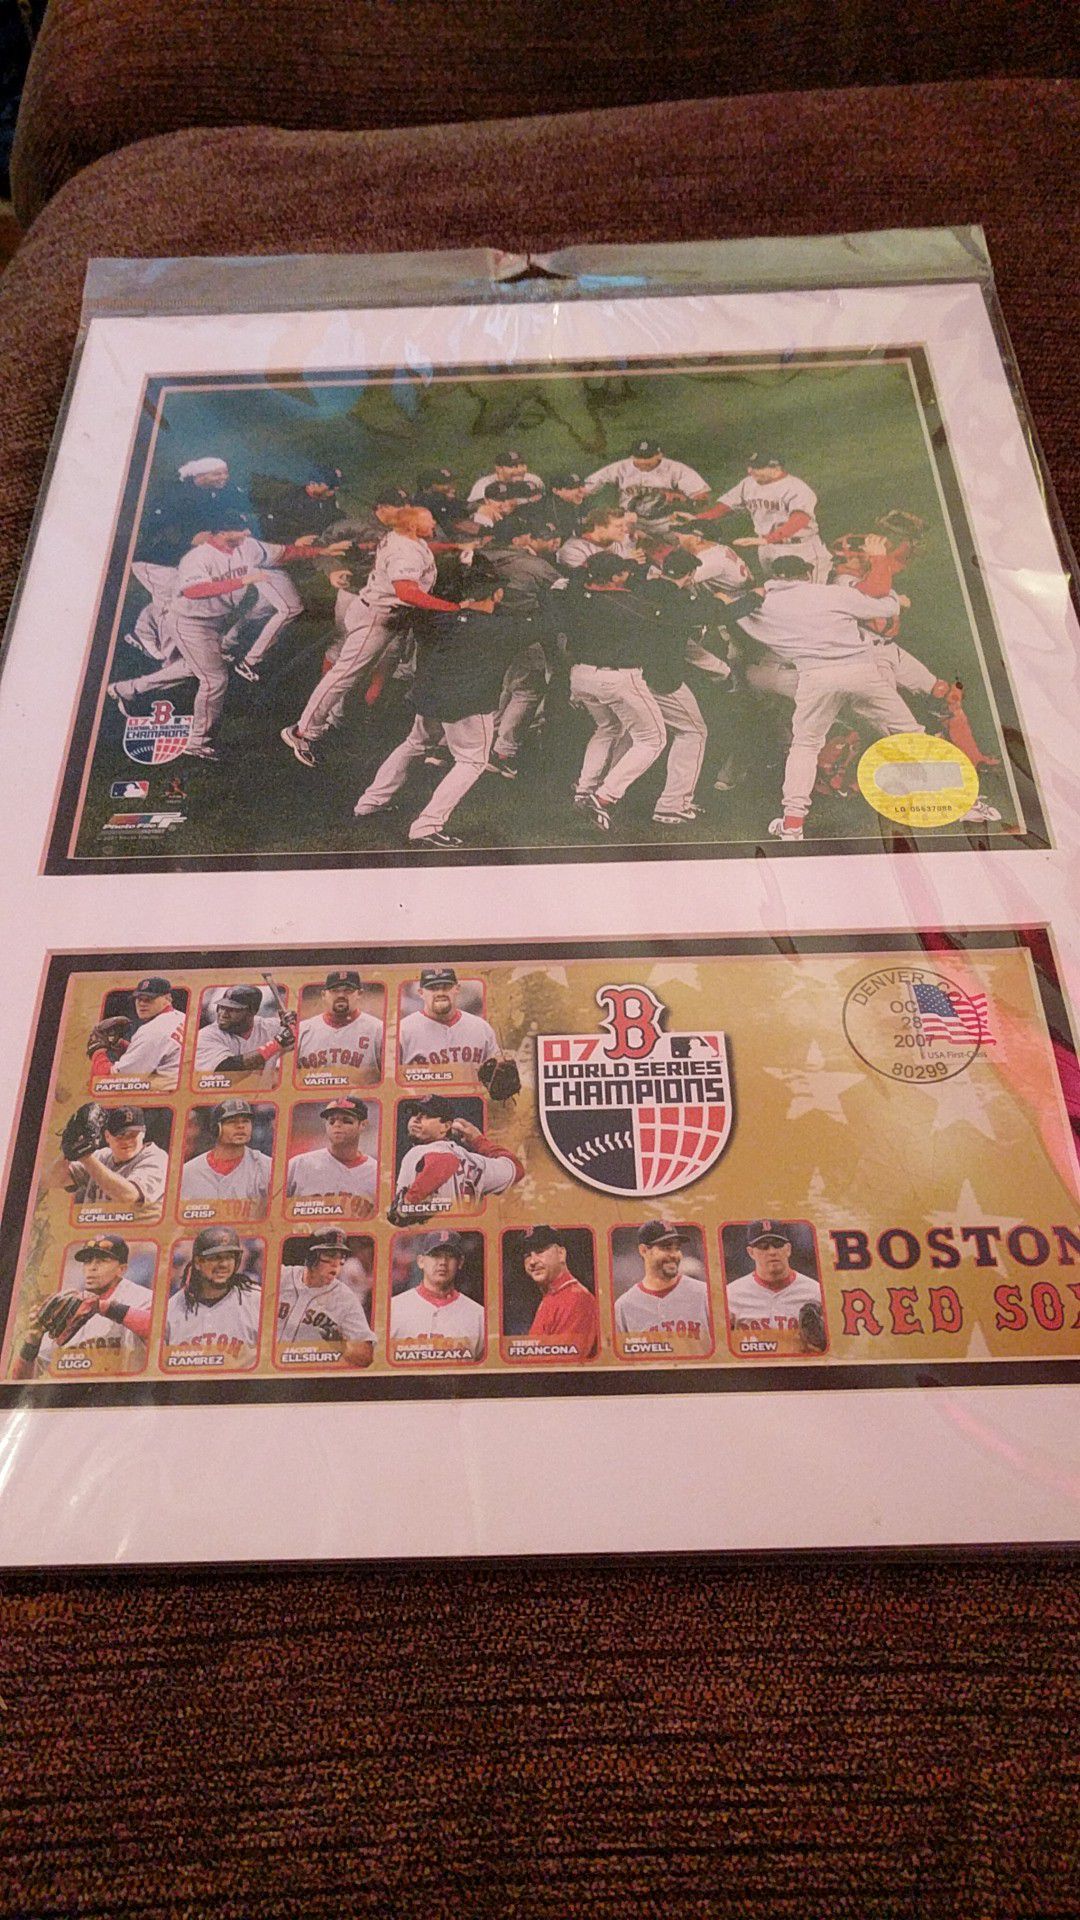 Red Sox world champs matted photo